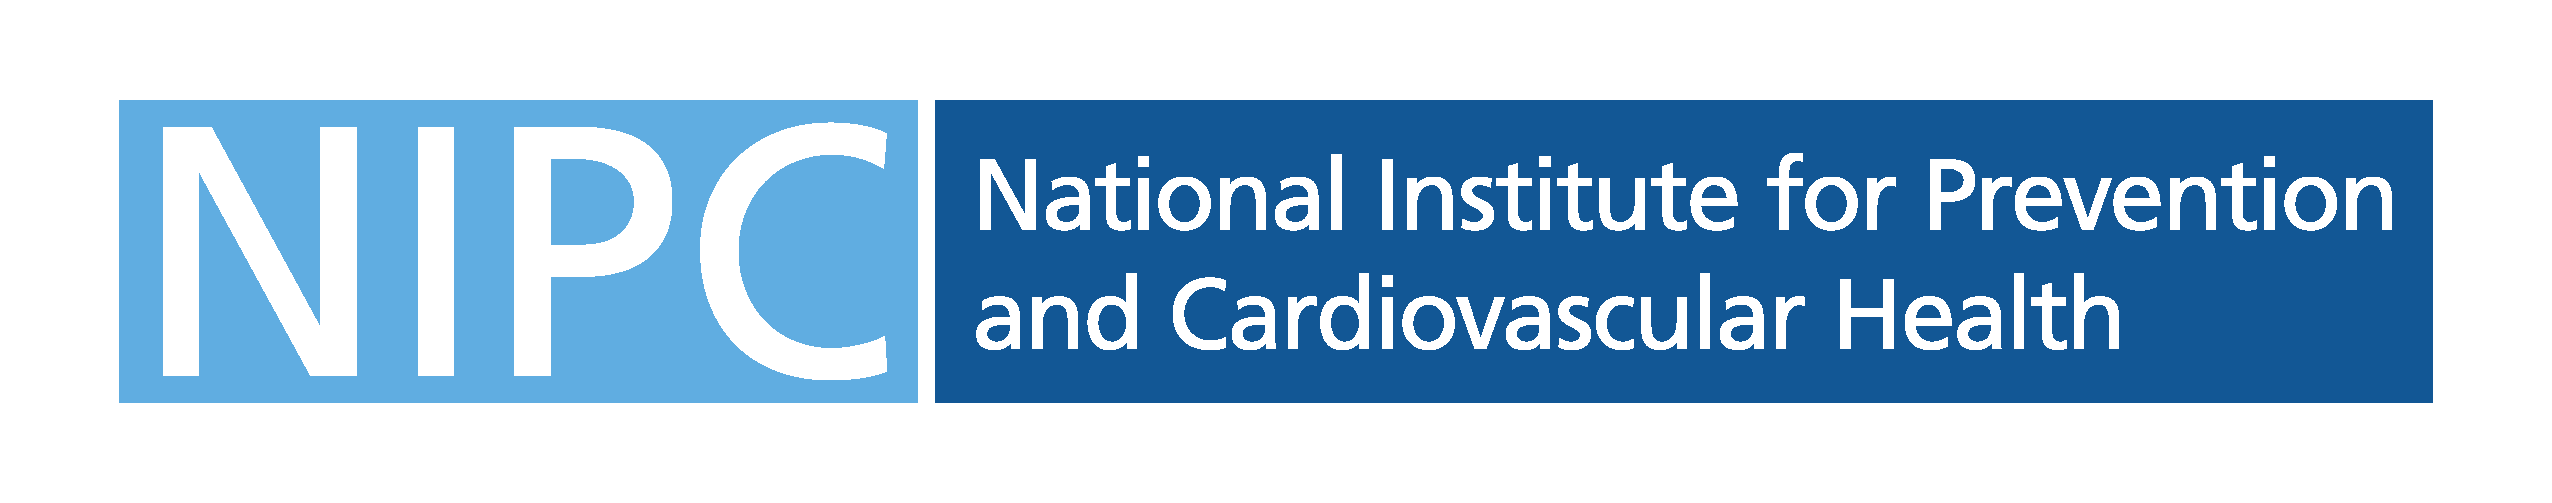 NIPC National Institute for Prevention and Cardiovascular Health